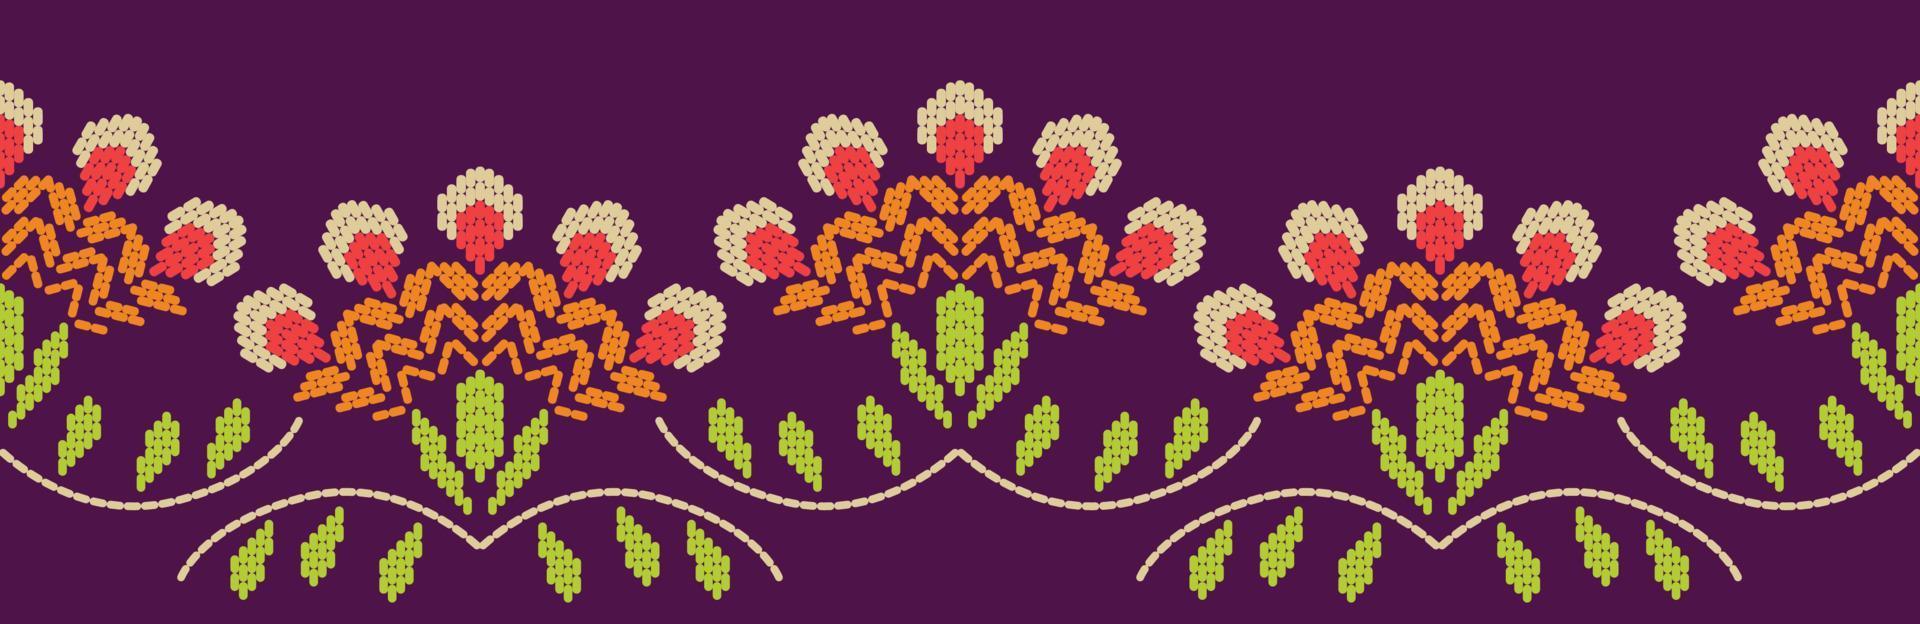 Motif ethnic handmade border beautiful embroidery art. Ethnic leaf floral pattern. folk embroidery, Mexican, Peruvian, Indian, Asia, Moroccan, Turkey, and Uzbek style.  beautiful flower decoration. vector